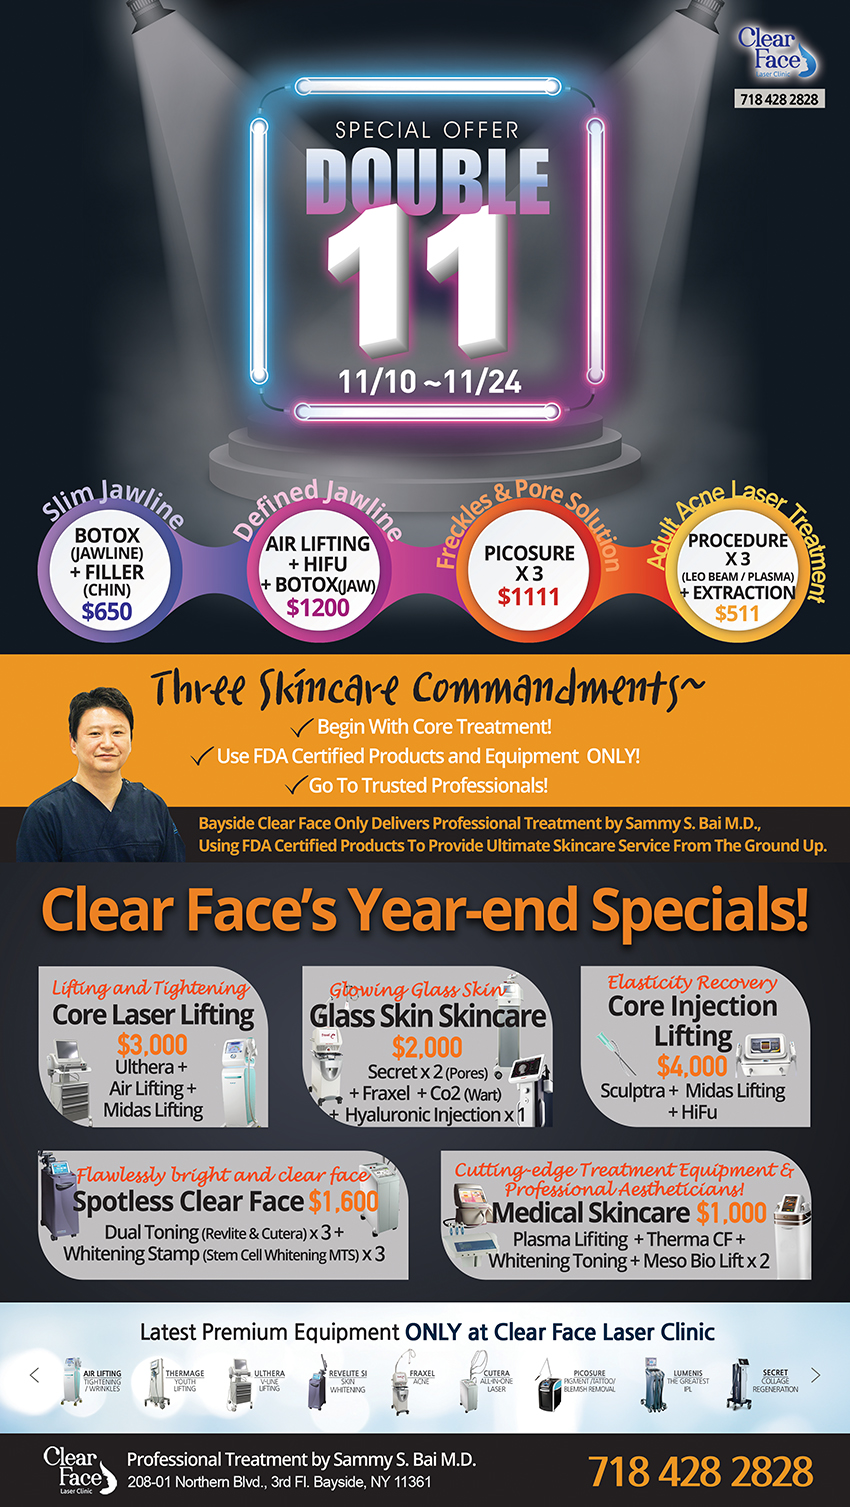 Clear Face's Year-end Specials!